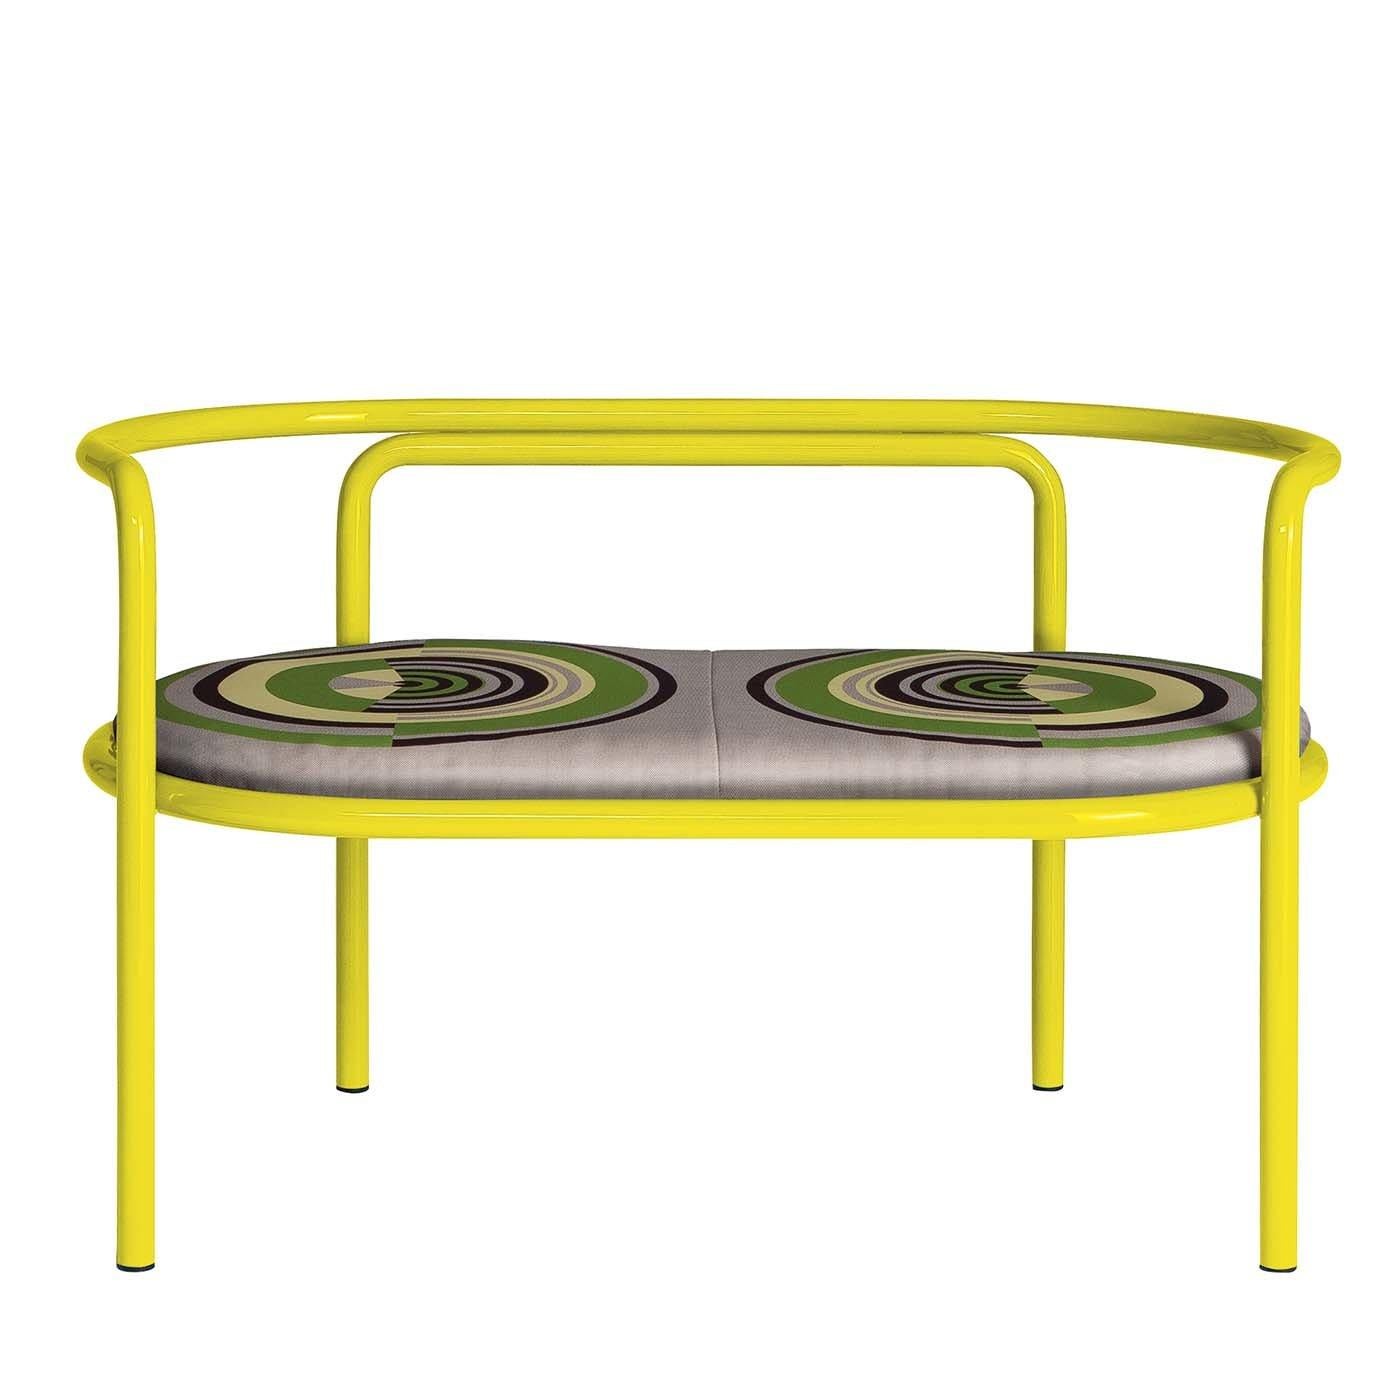 The set contains:
- 1x Locus Solus Yellow Dining Table by Gae Aulenti (RAL 1017 + cover): USD 2,800 plus shipping USD 450 
- 3x Locus Solus Yellow Chair by Gae Aulenti (RAL 1017 + cover + extra cushion): USD 4,650 plus shipping USD 1,020
- 2x Locus